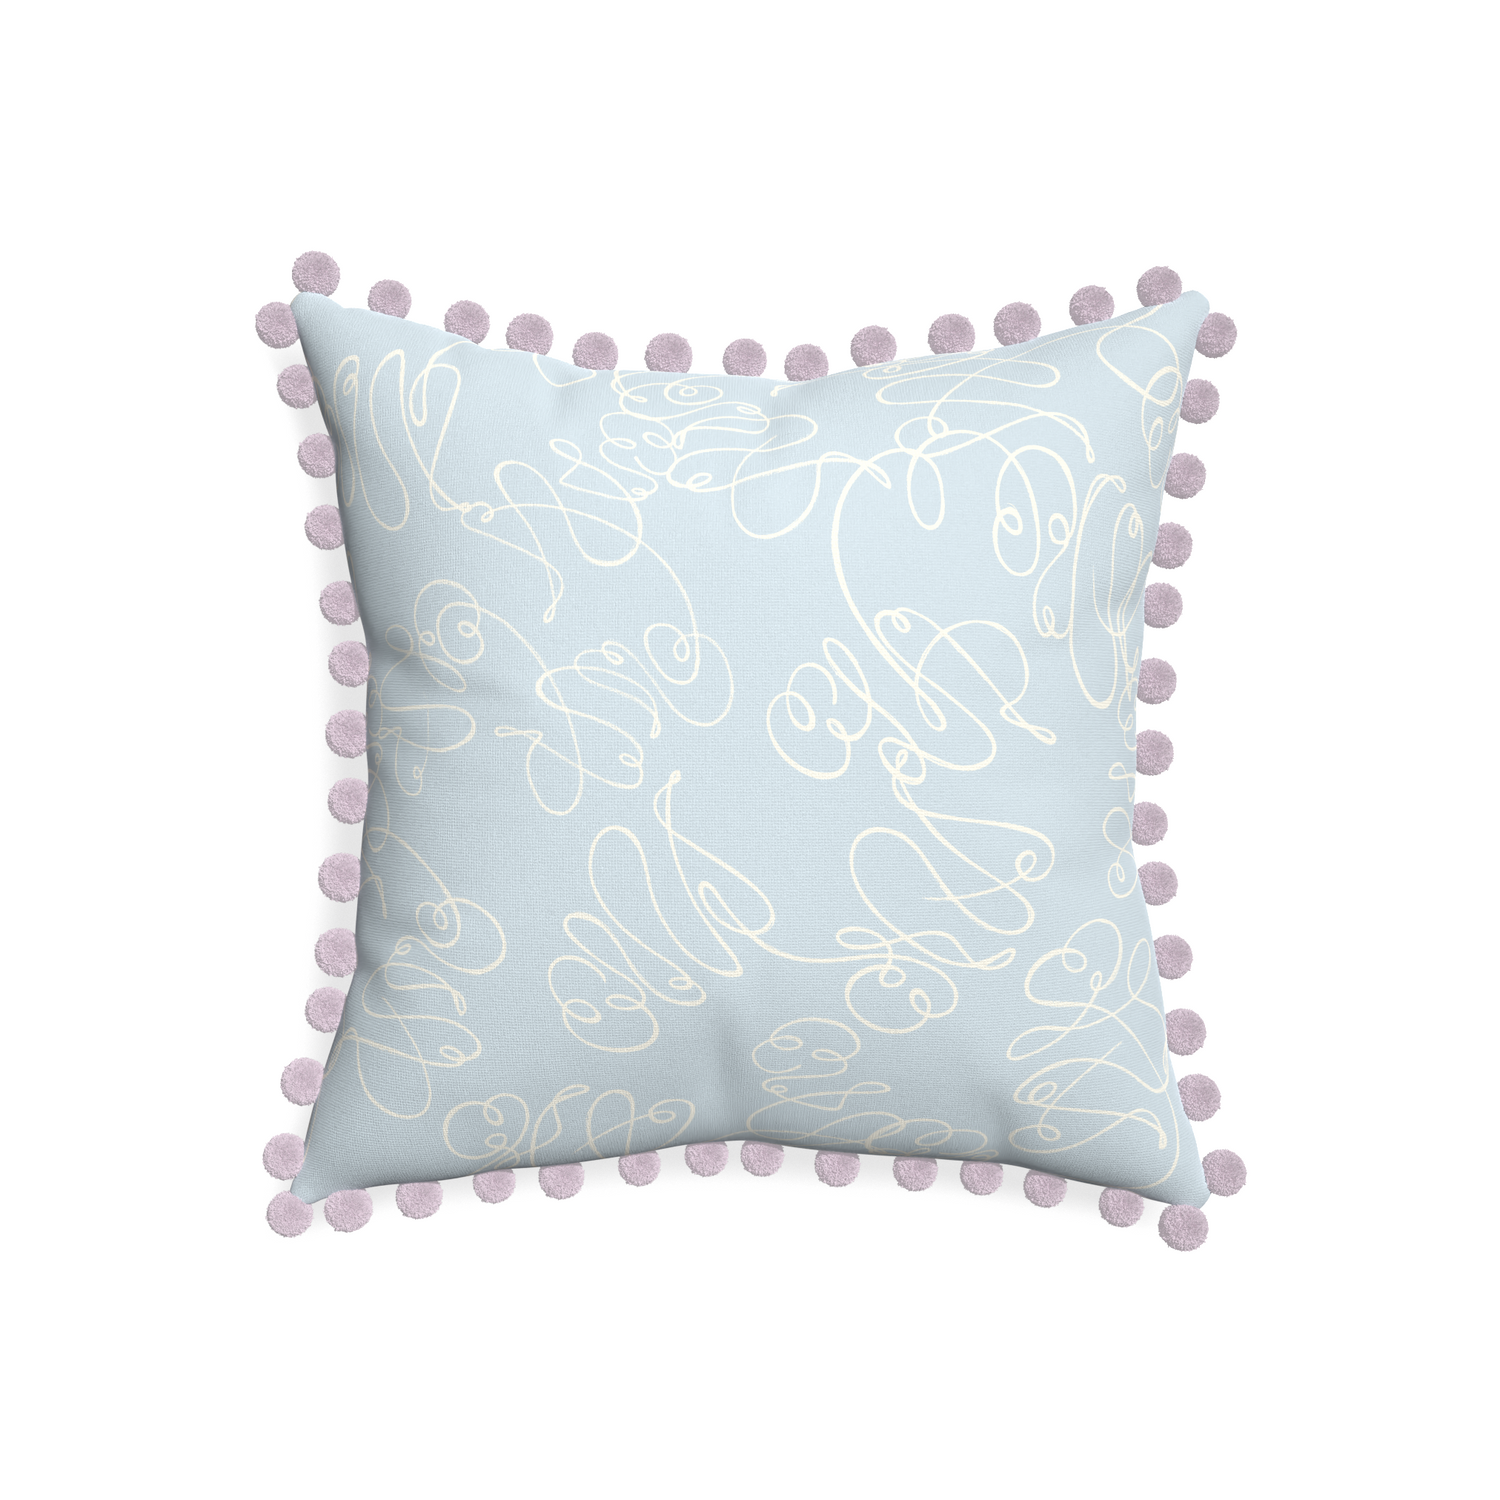 20-square mirabella custom pillow with l on white background